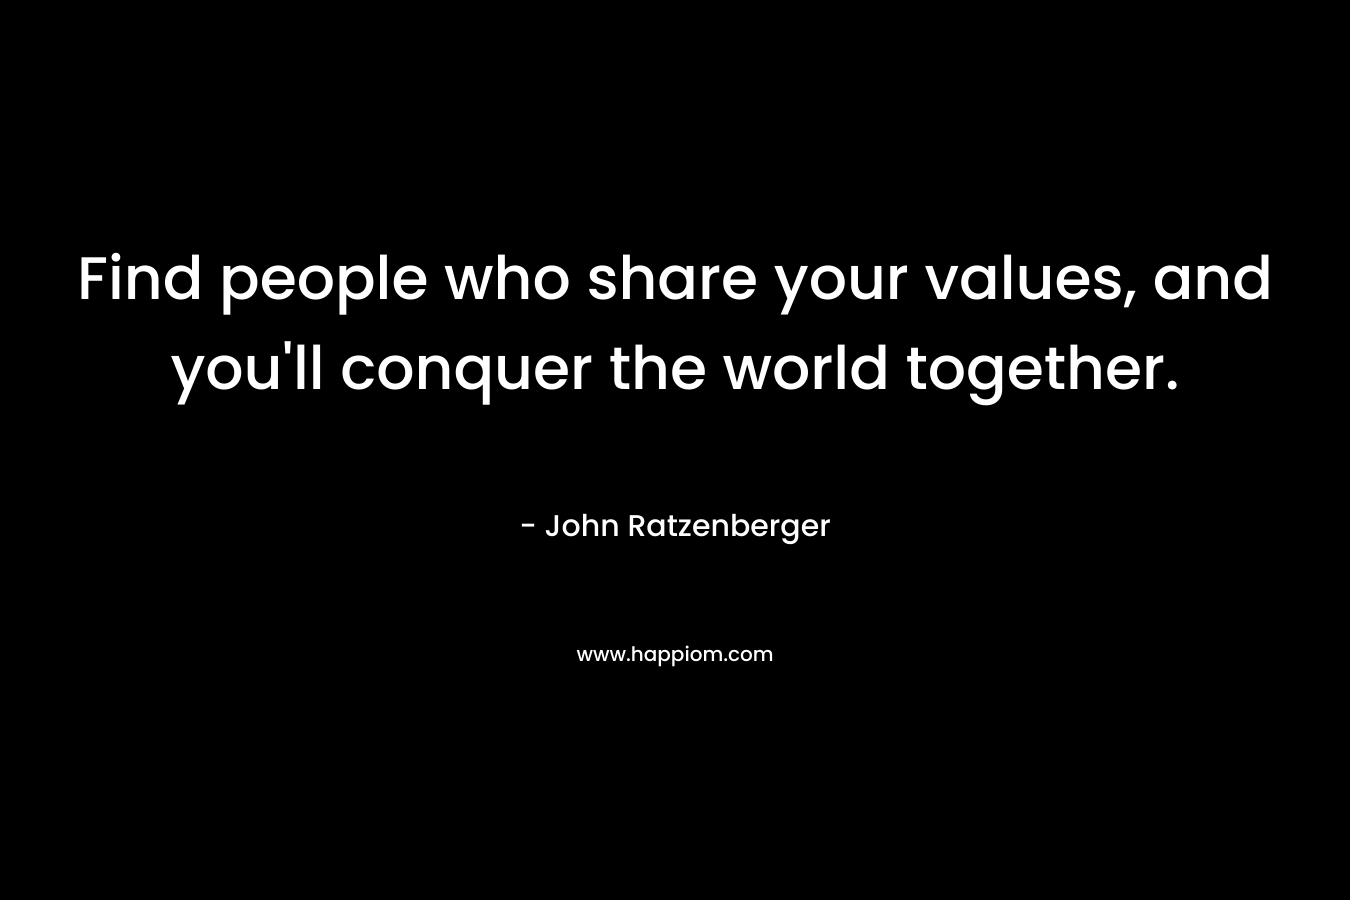 Find people who share your values, and you'll conquer the world together.